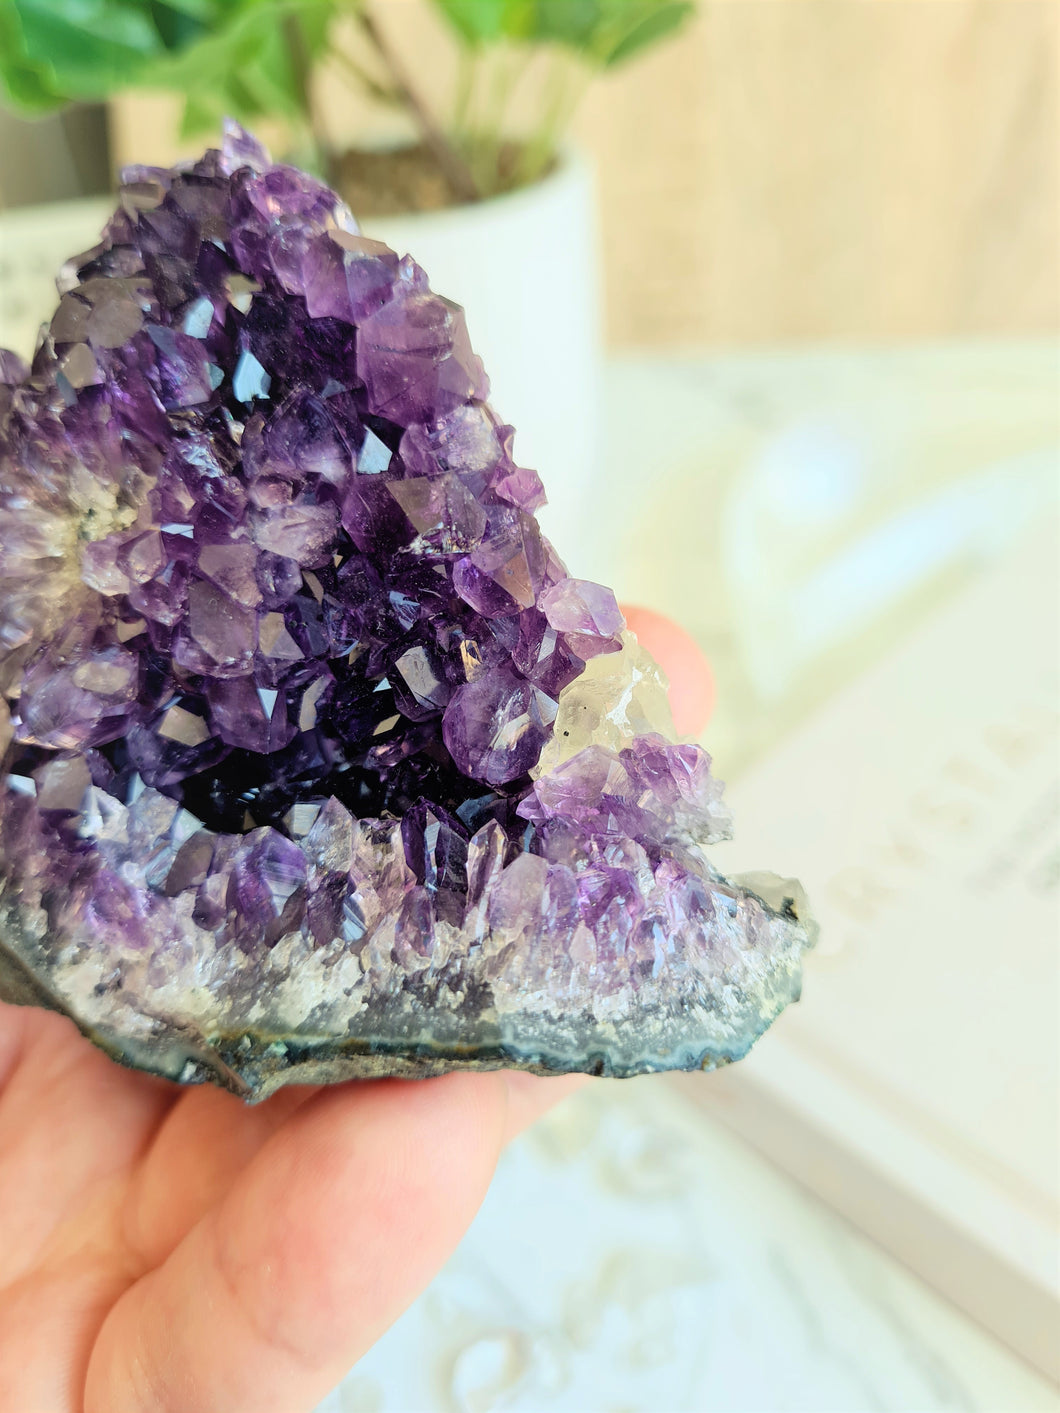 The perfect piece to bring calming, soothing energies into your home. Amethyst helps you think clearly and slow down your thoughts to manage your stress and anxieties better. With beautiful, vivid purple shades, this crystal will be the perfect addition to your collection